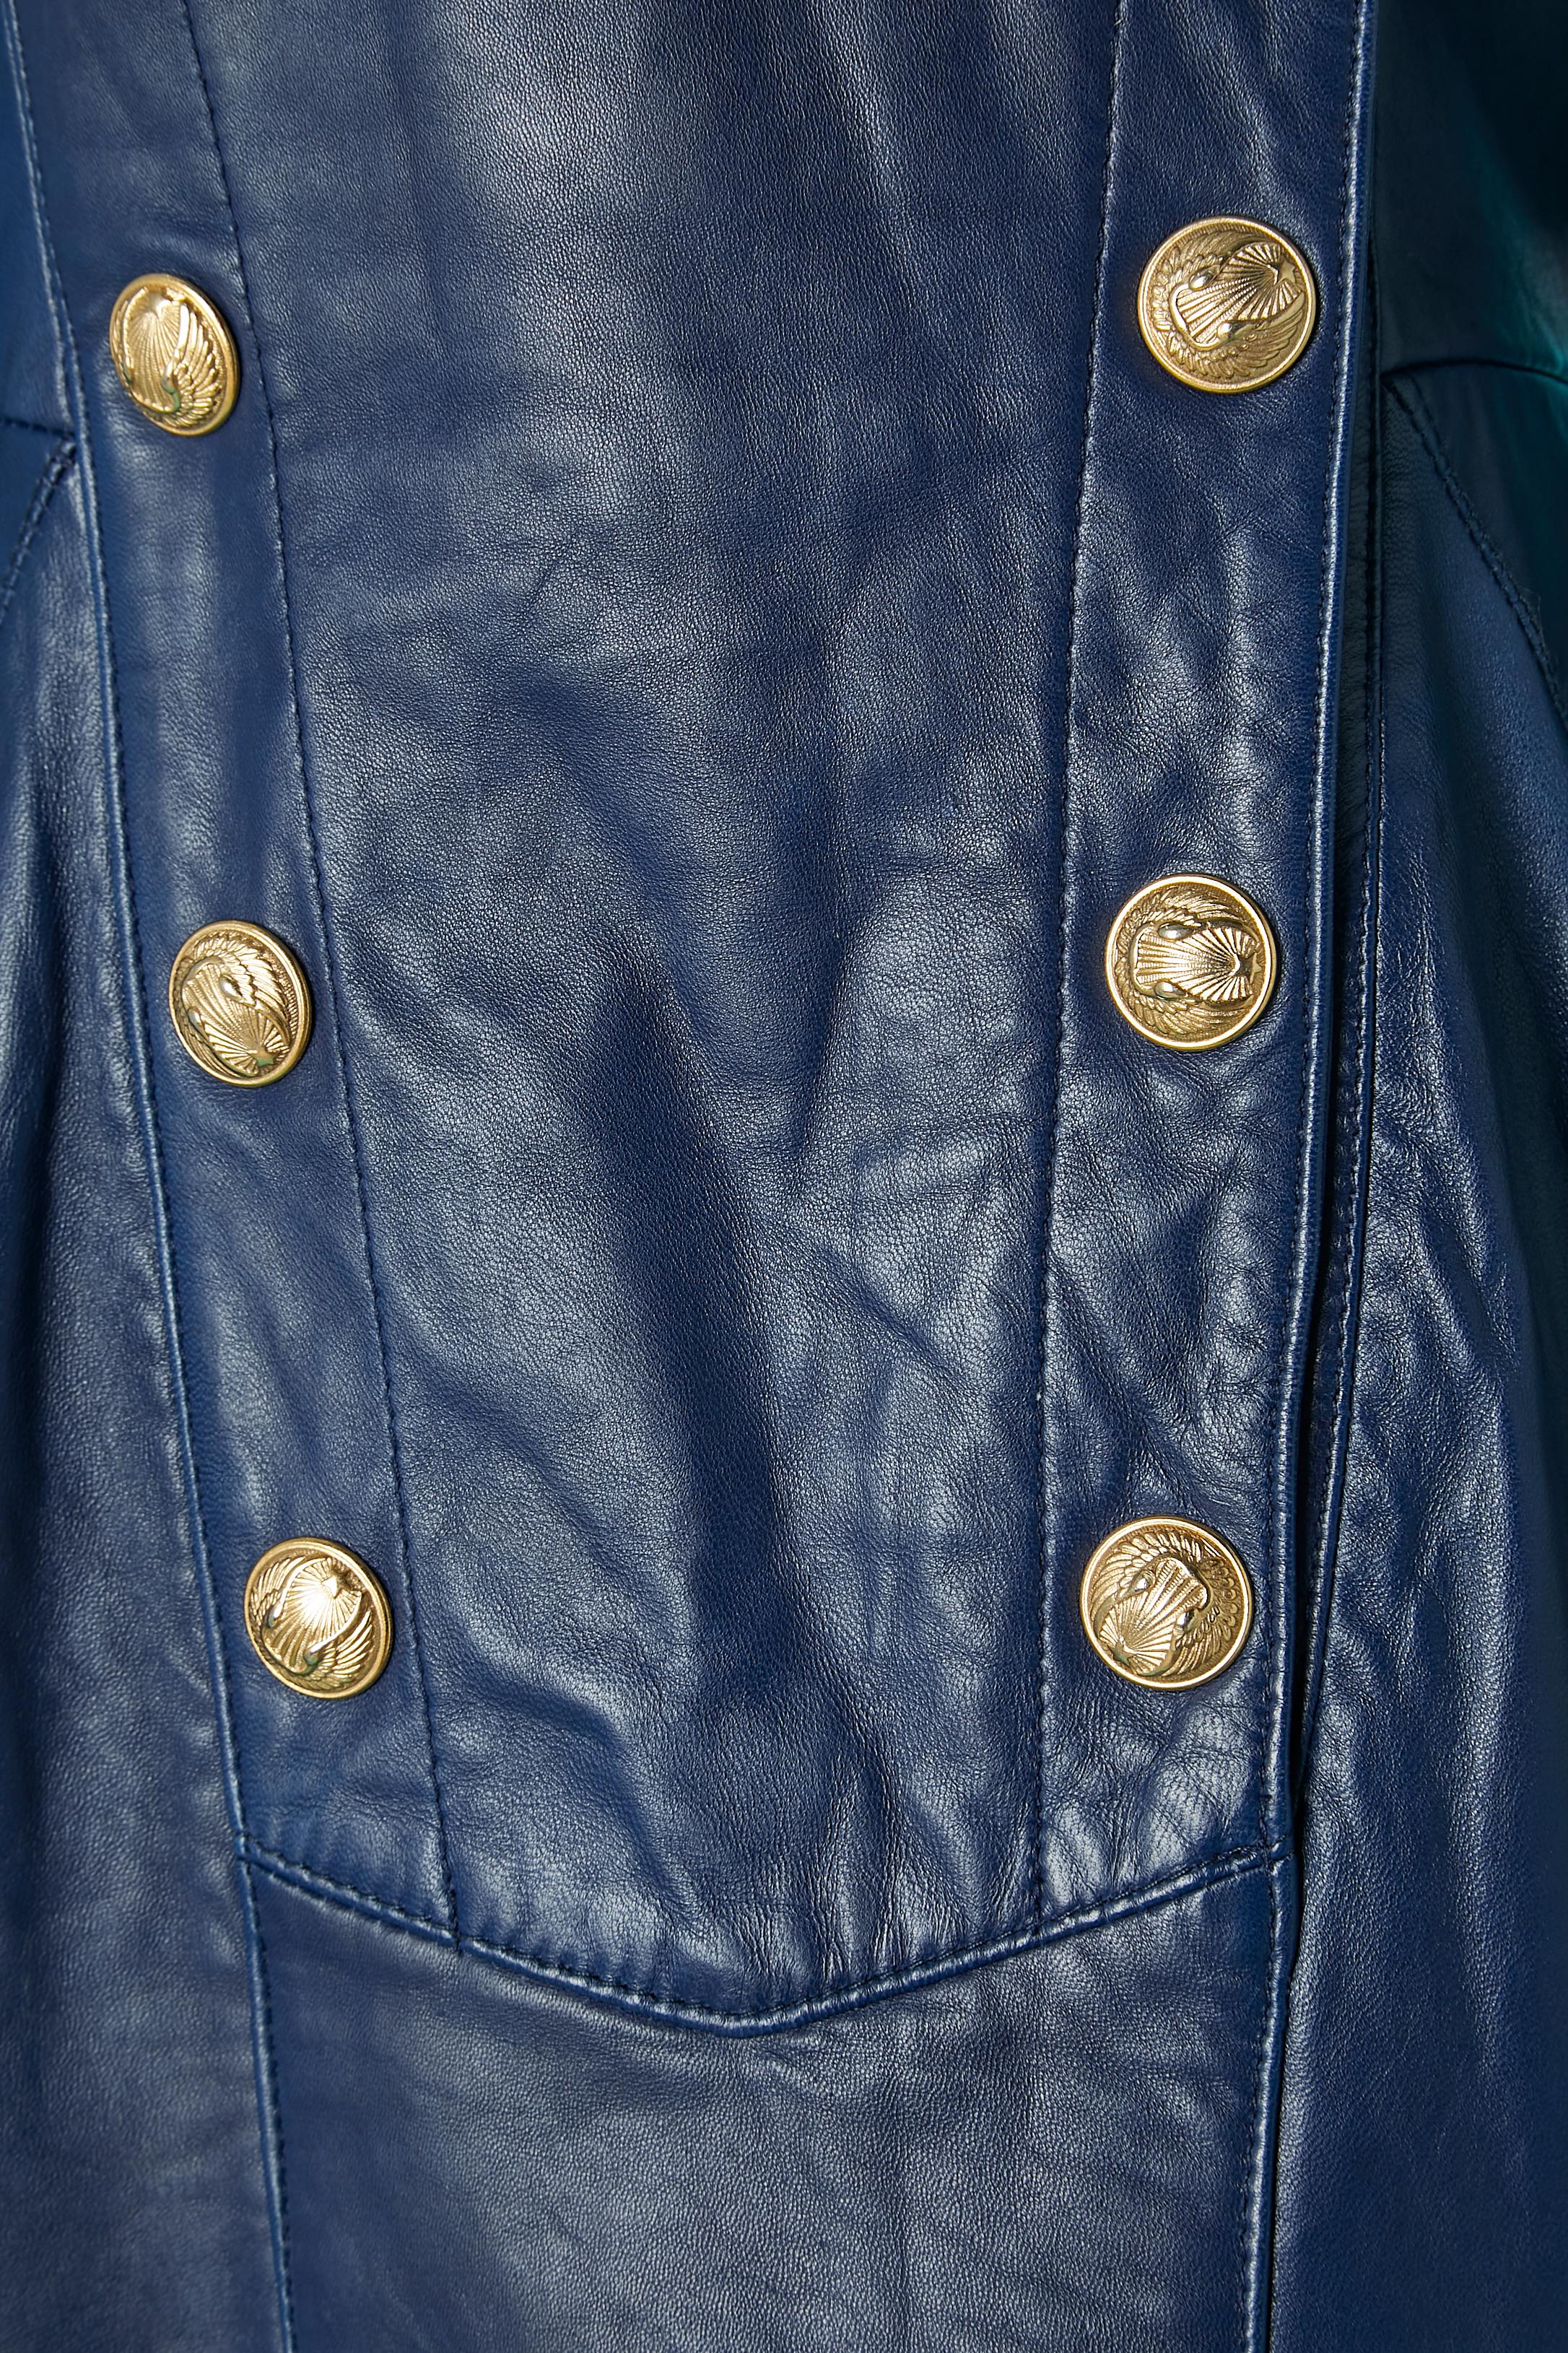 Night blue officier leather dress with gold 